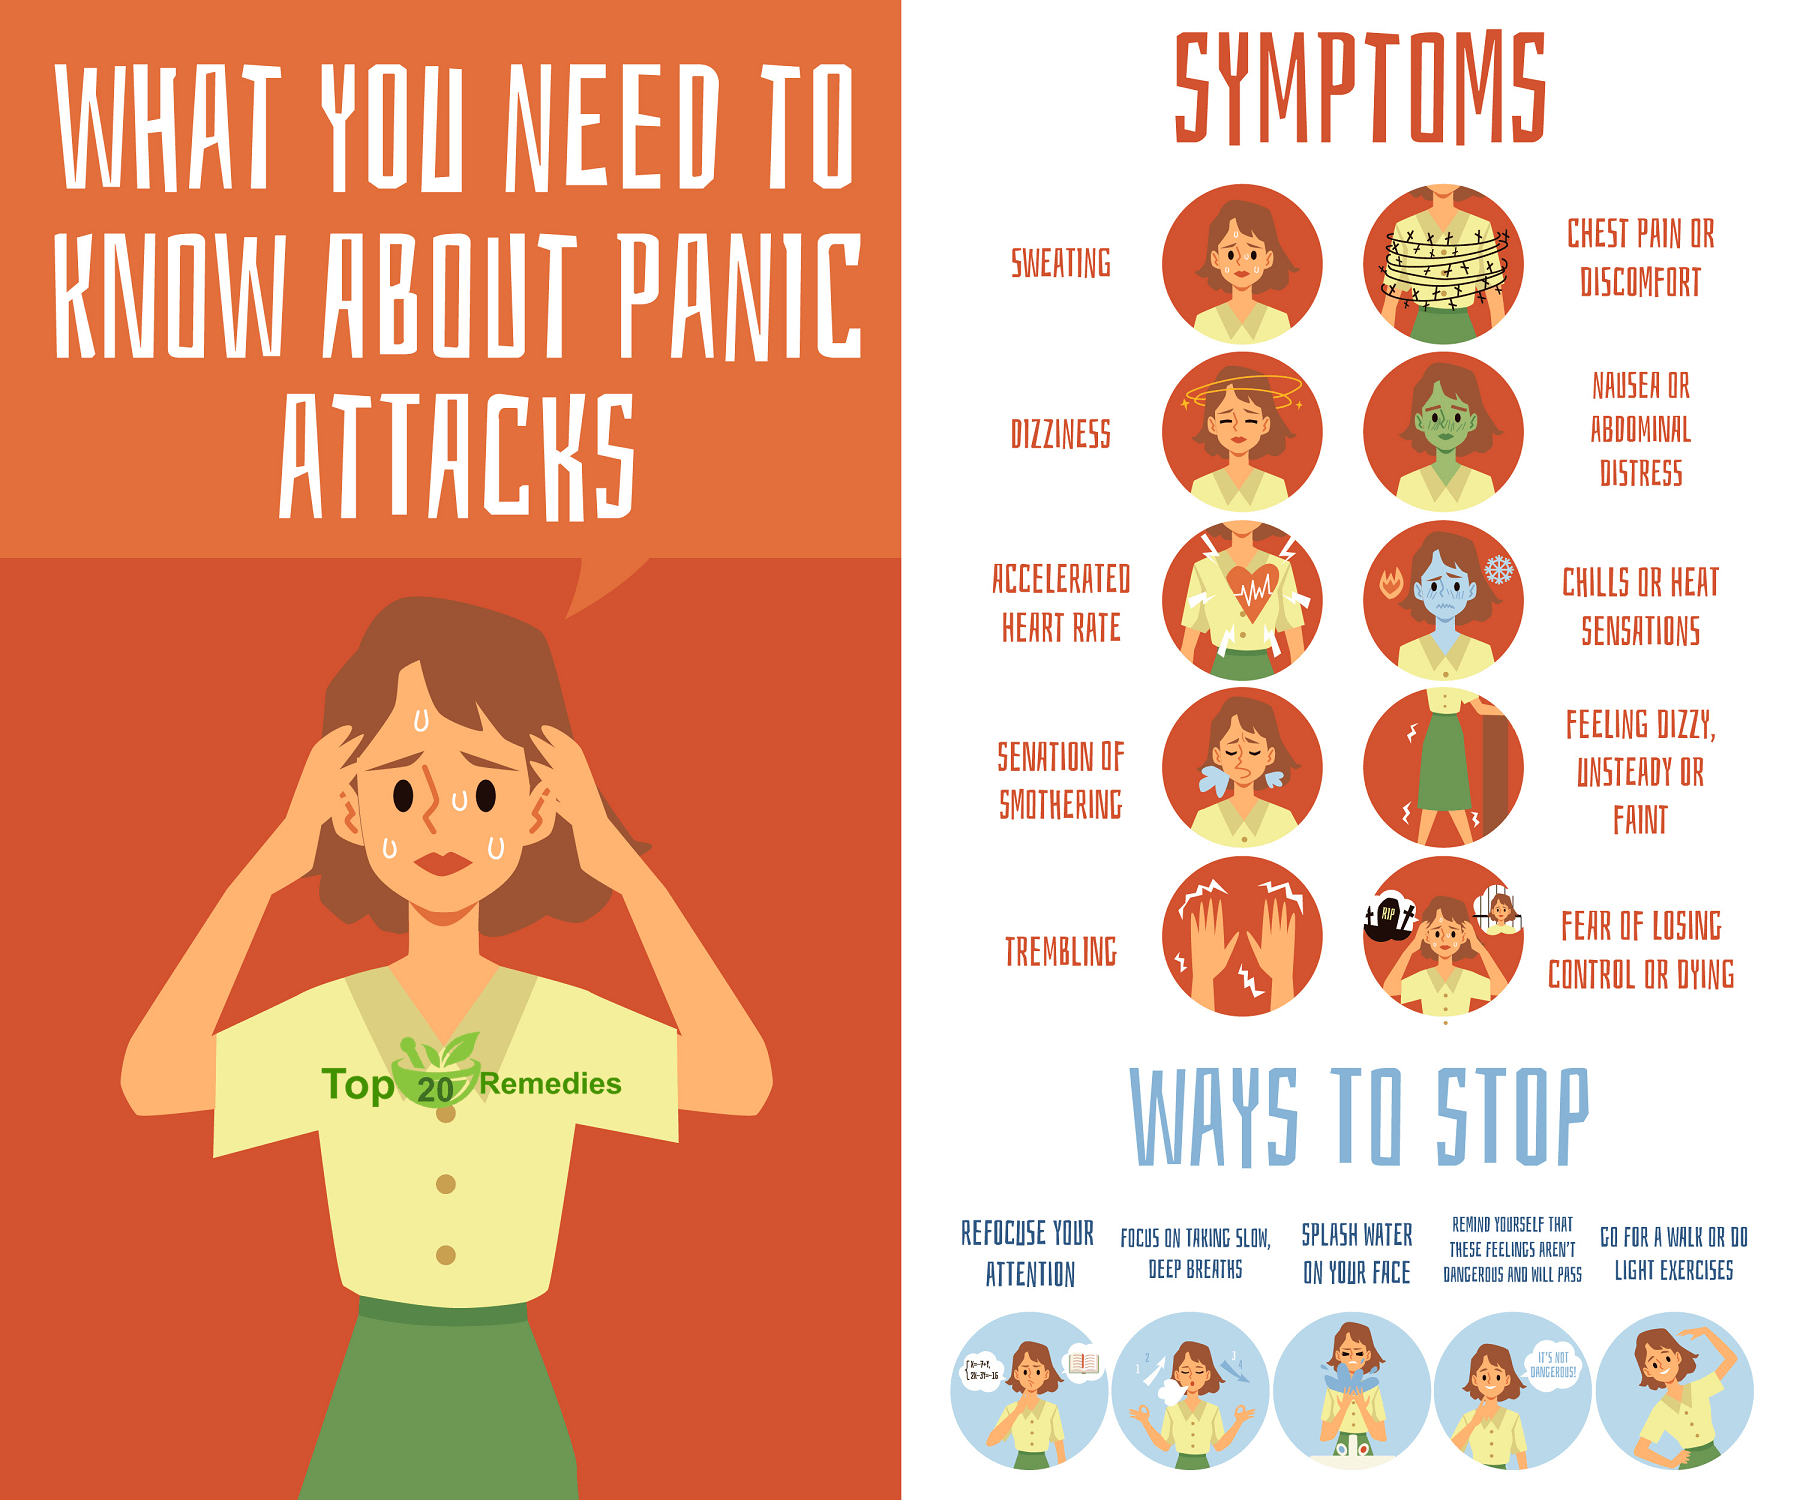 How to control anxiety and panic attacks naturally